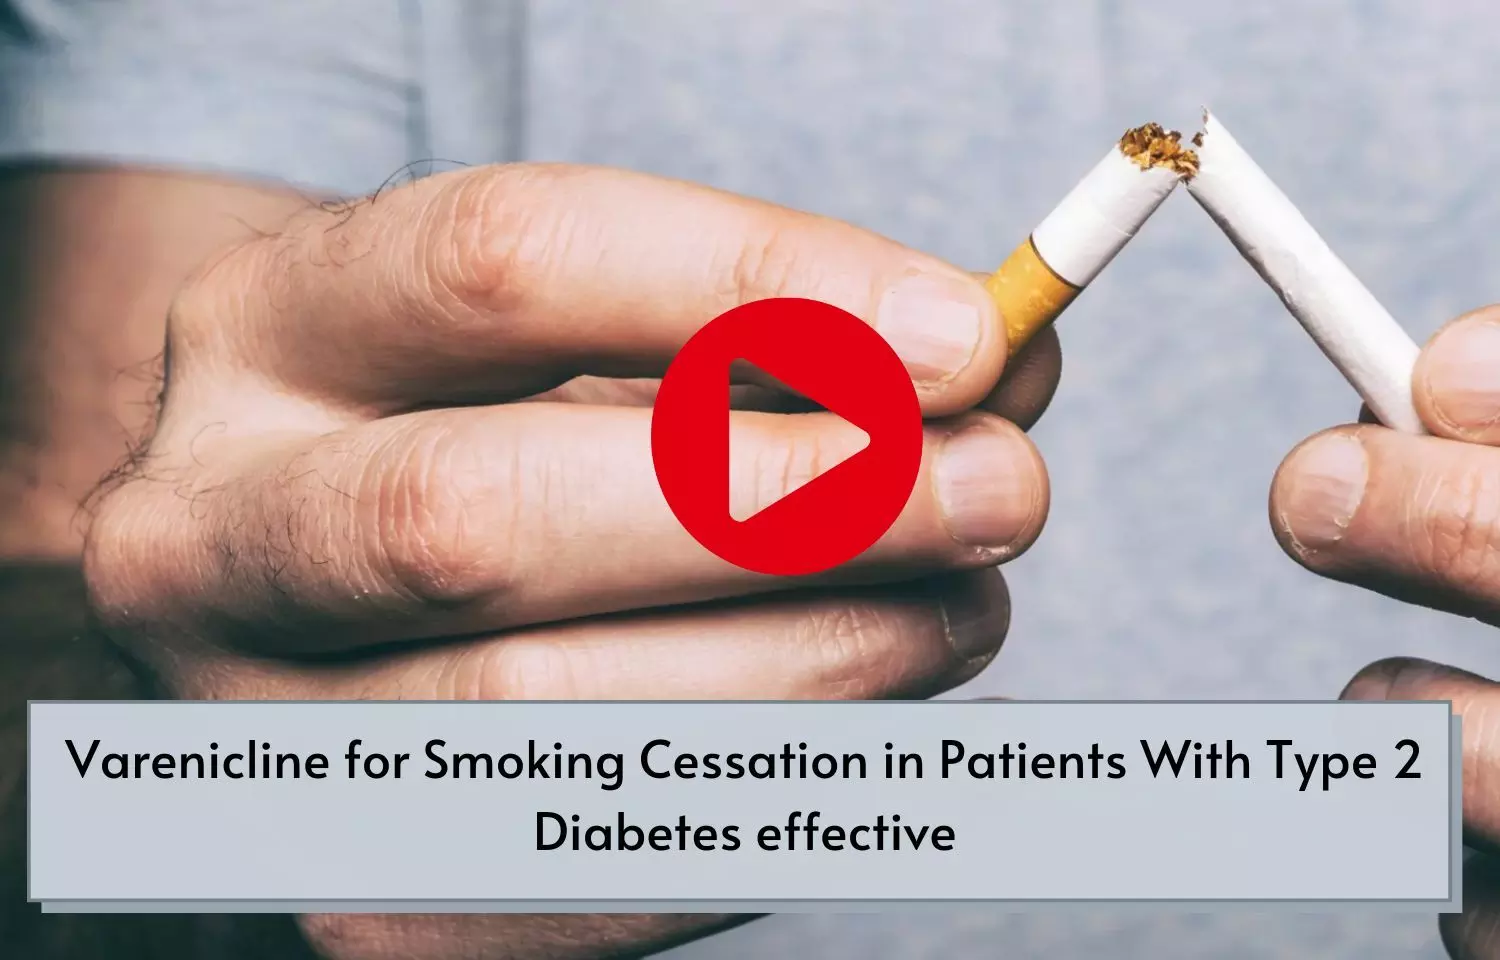 Varenicline for Smoking Cessation in Patients With Type 2 Diabetes effective